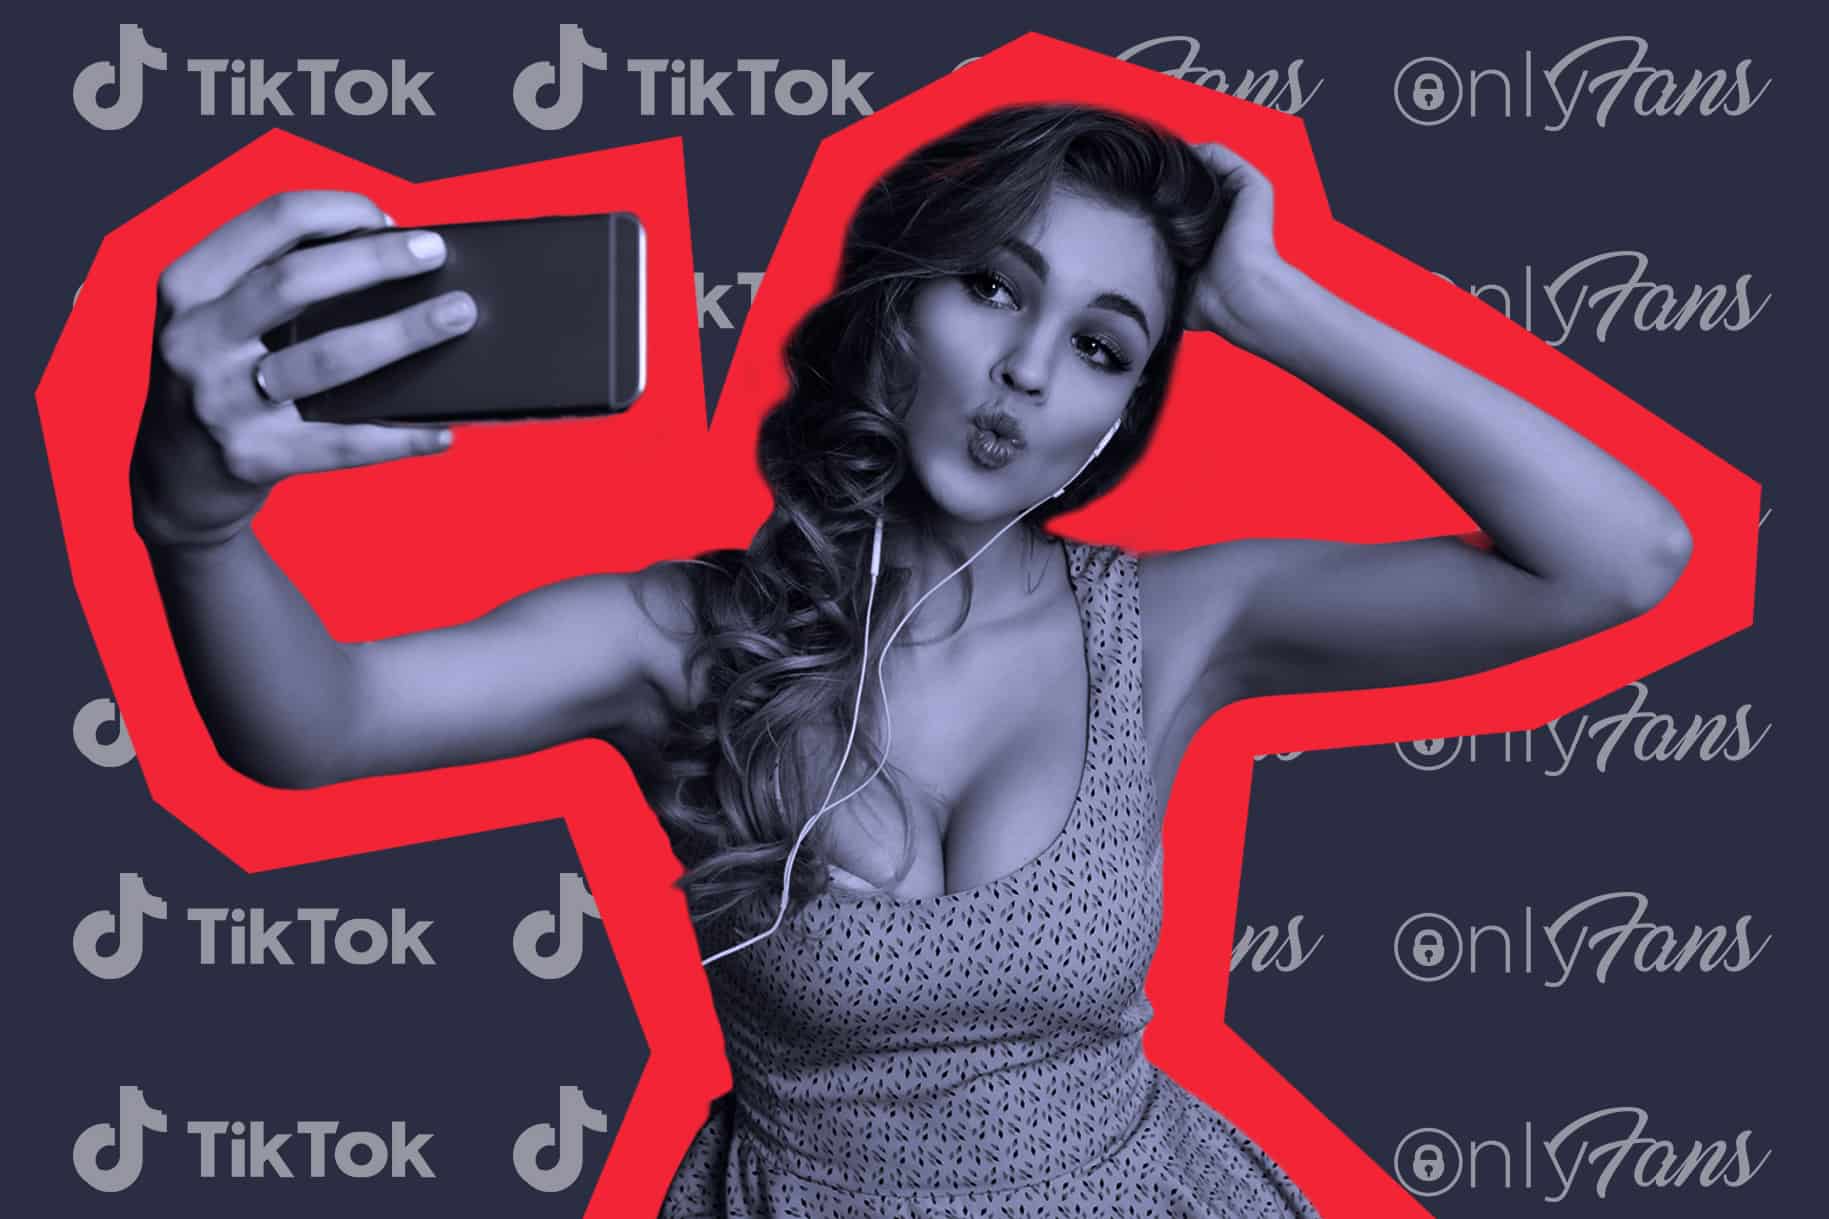 Tiktokers With Onlyfans